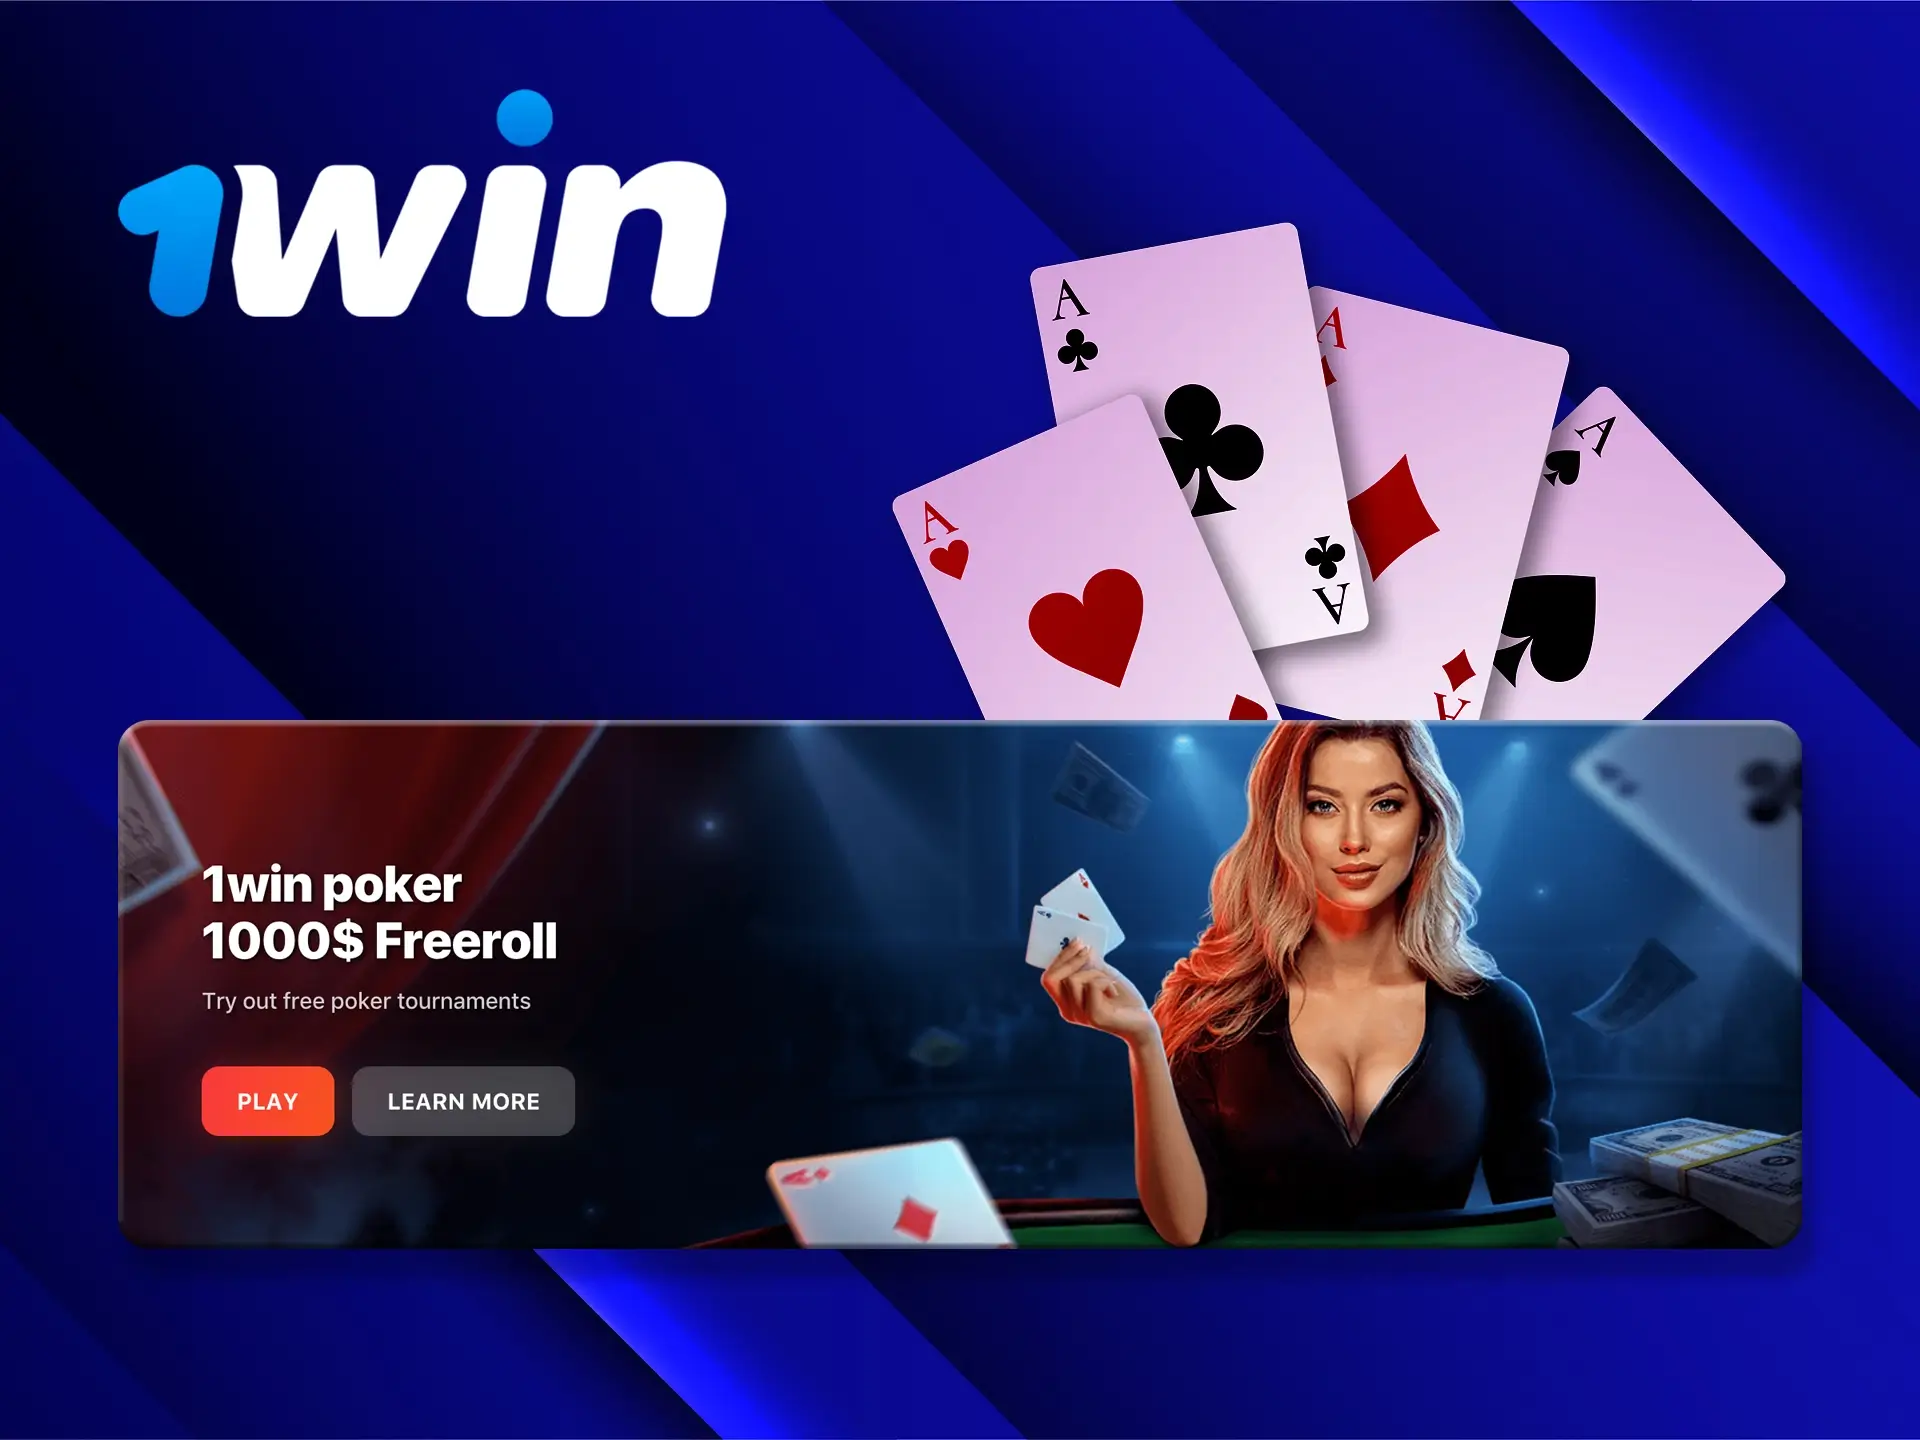 Poker fans can also get a big bonus from 1Win.